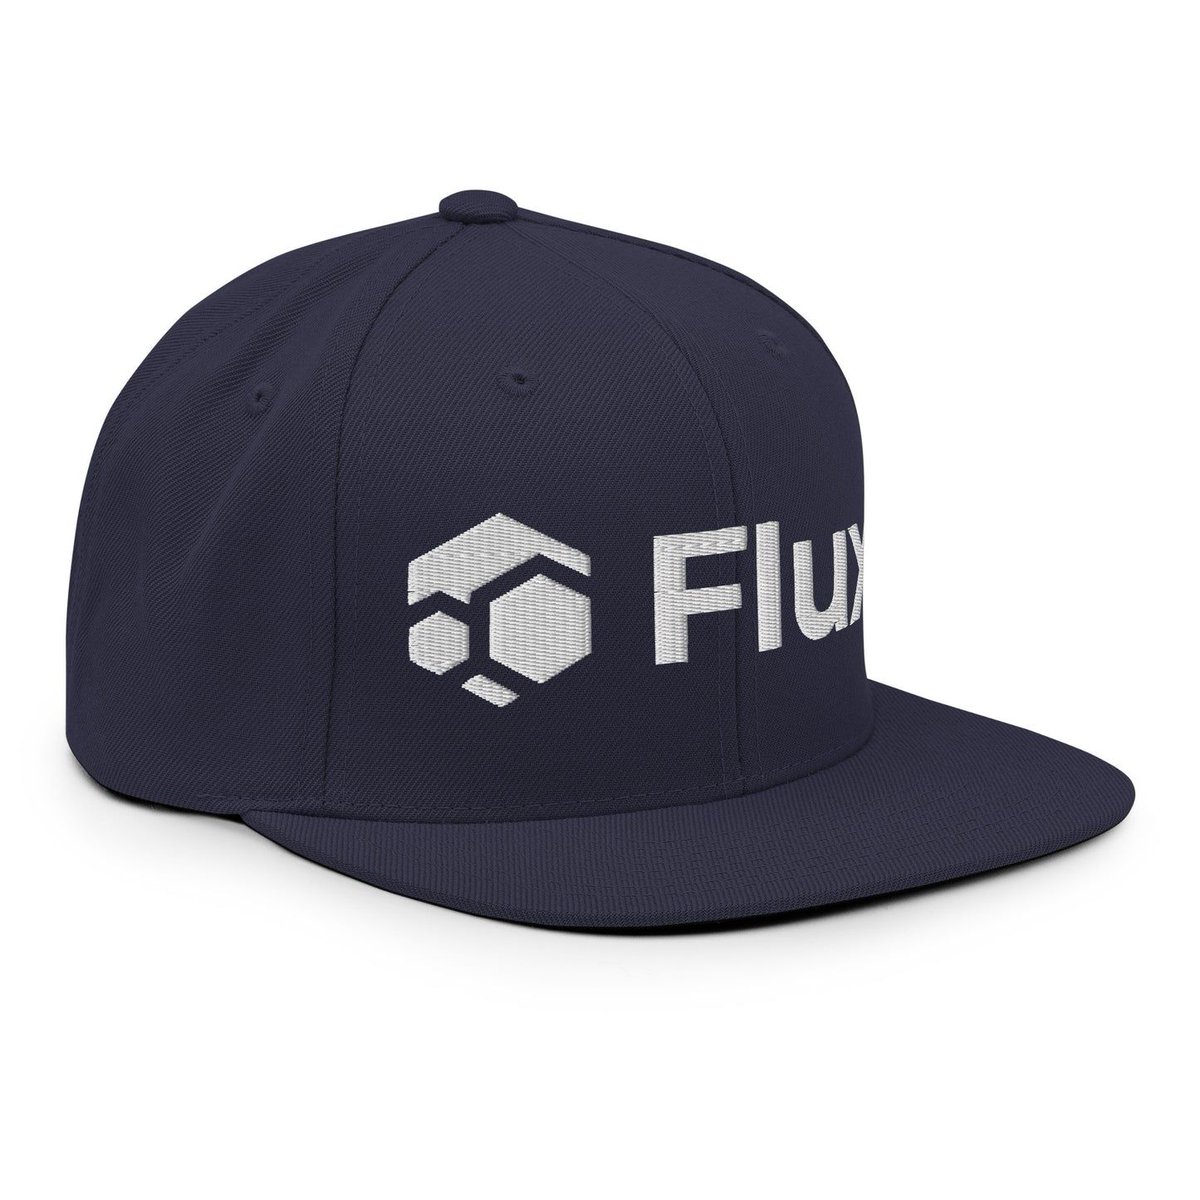 This Flux hat is structured with a classic fit, flat brim, and full buckram. The adjustable snap closure makes it a comfortable, one-size-fits-most hat. 👉 buff.ly/4bwX9XB #cryptostyle $Flux #Flux